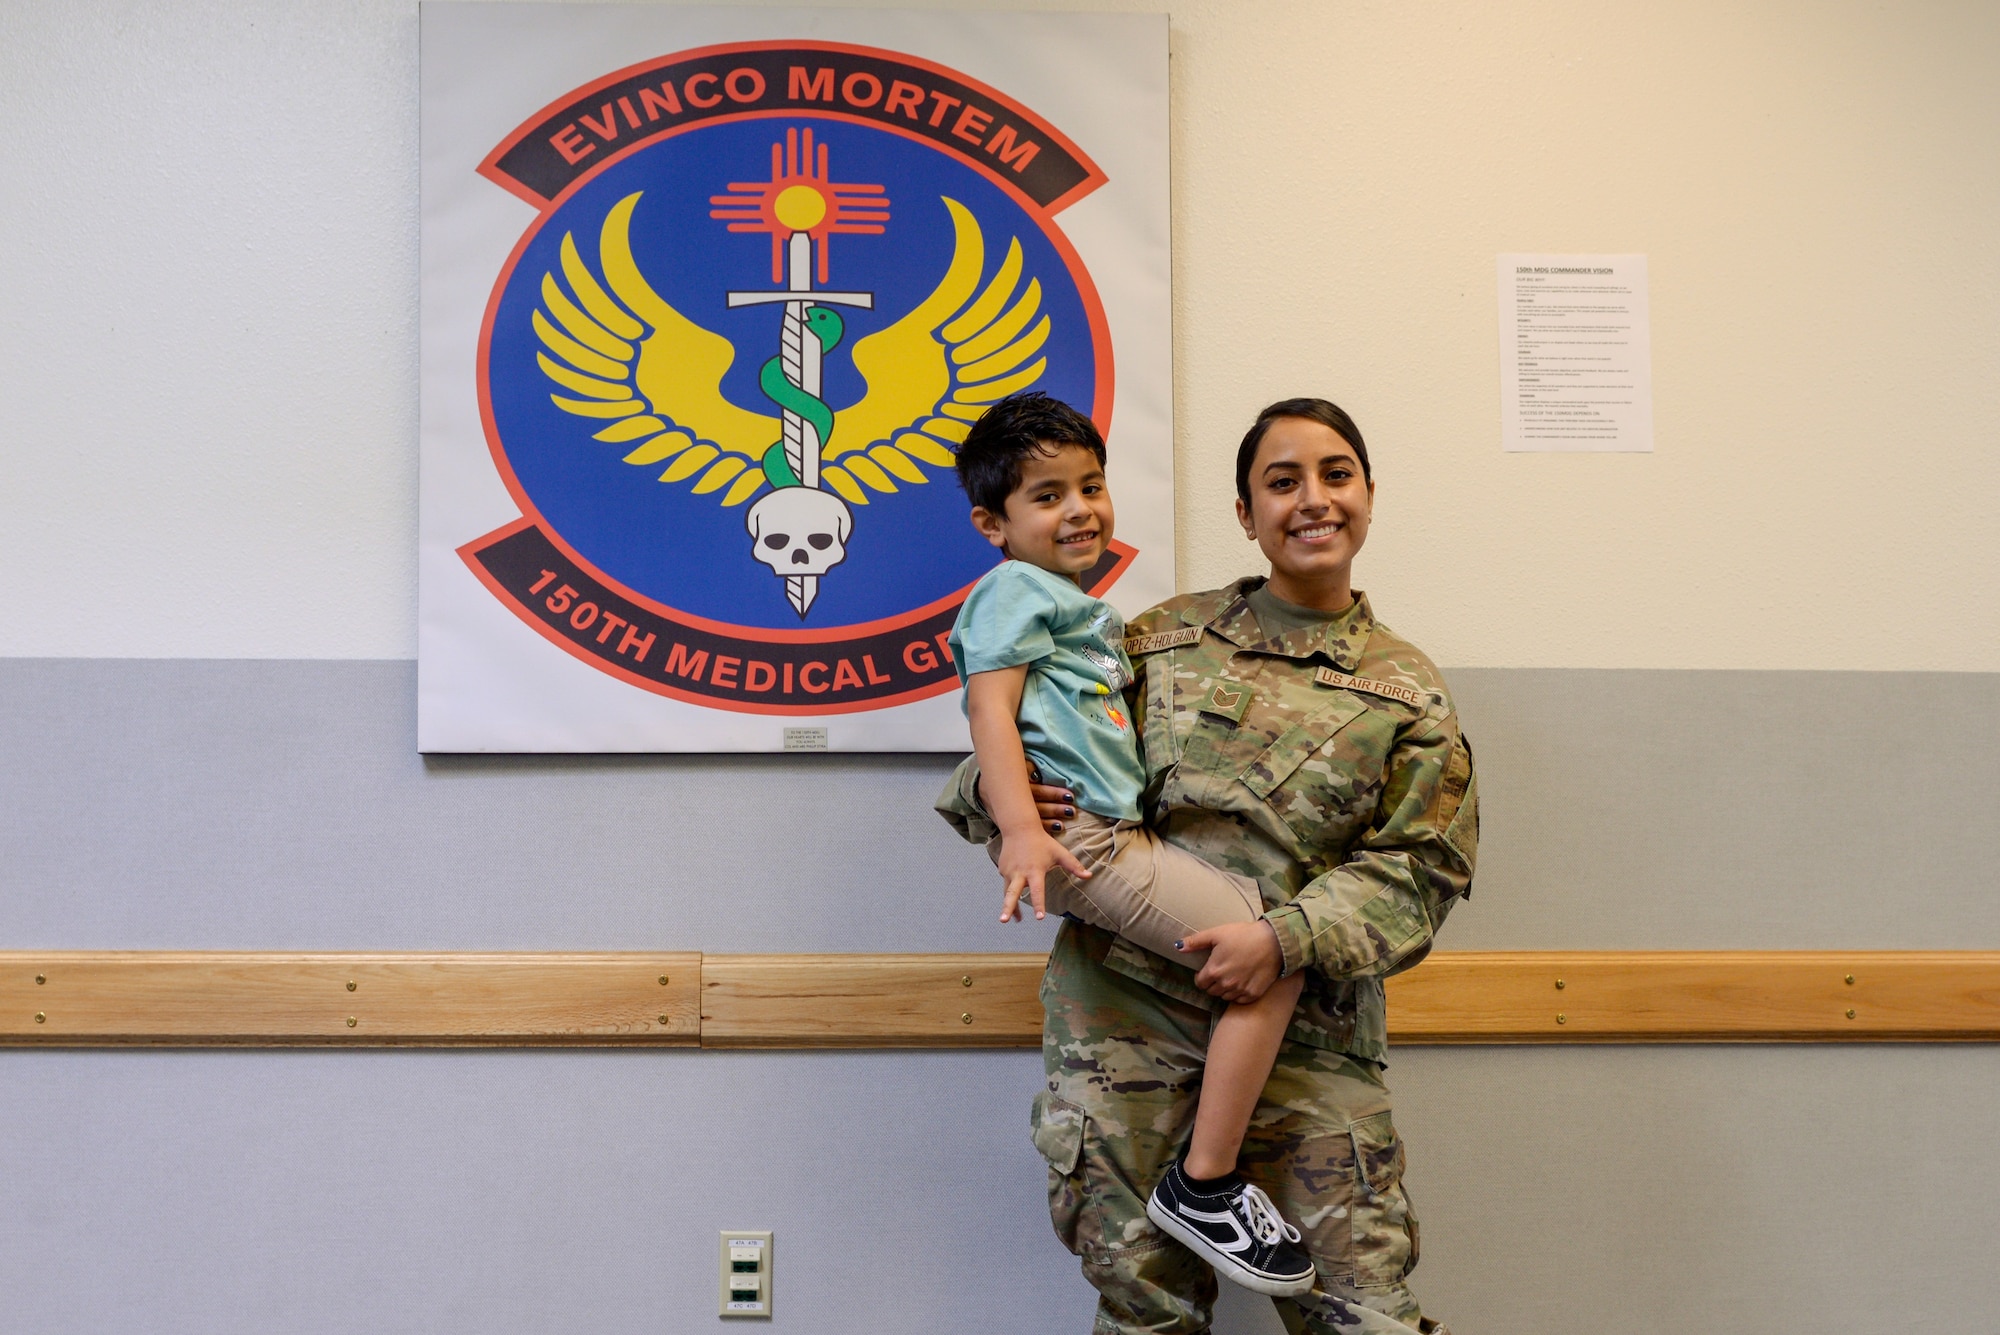 Tech. Sgt. Raven Lopez stands in front of the 150th medical group logo while holding her son in the lobby of the 150th medical building